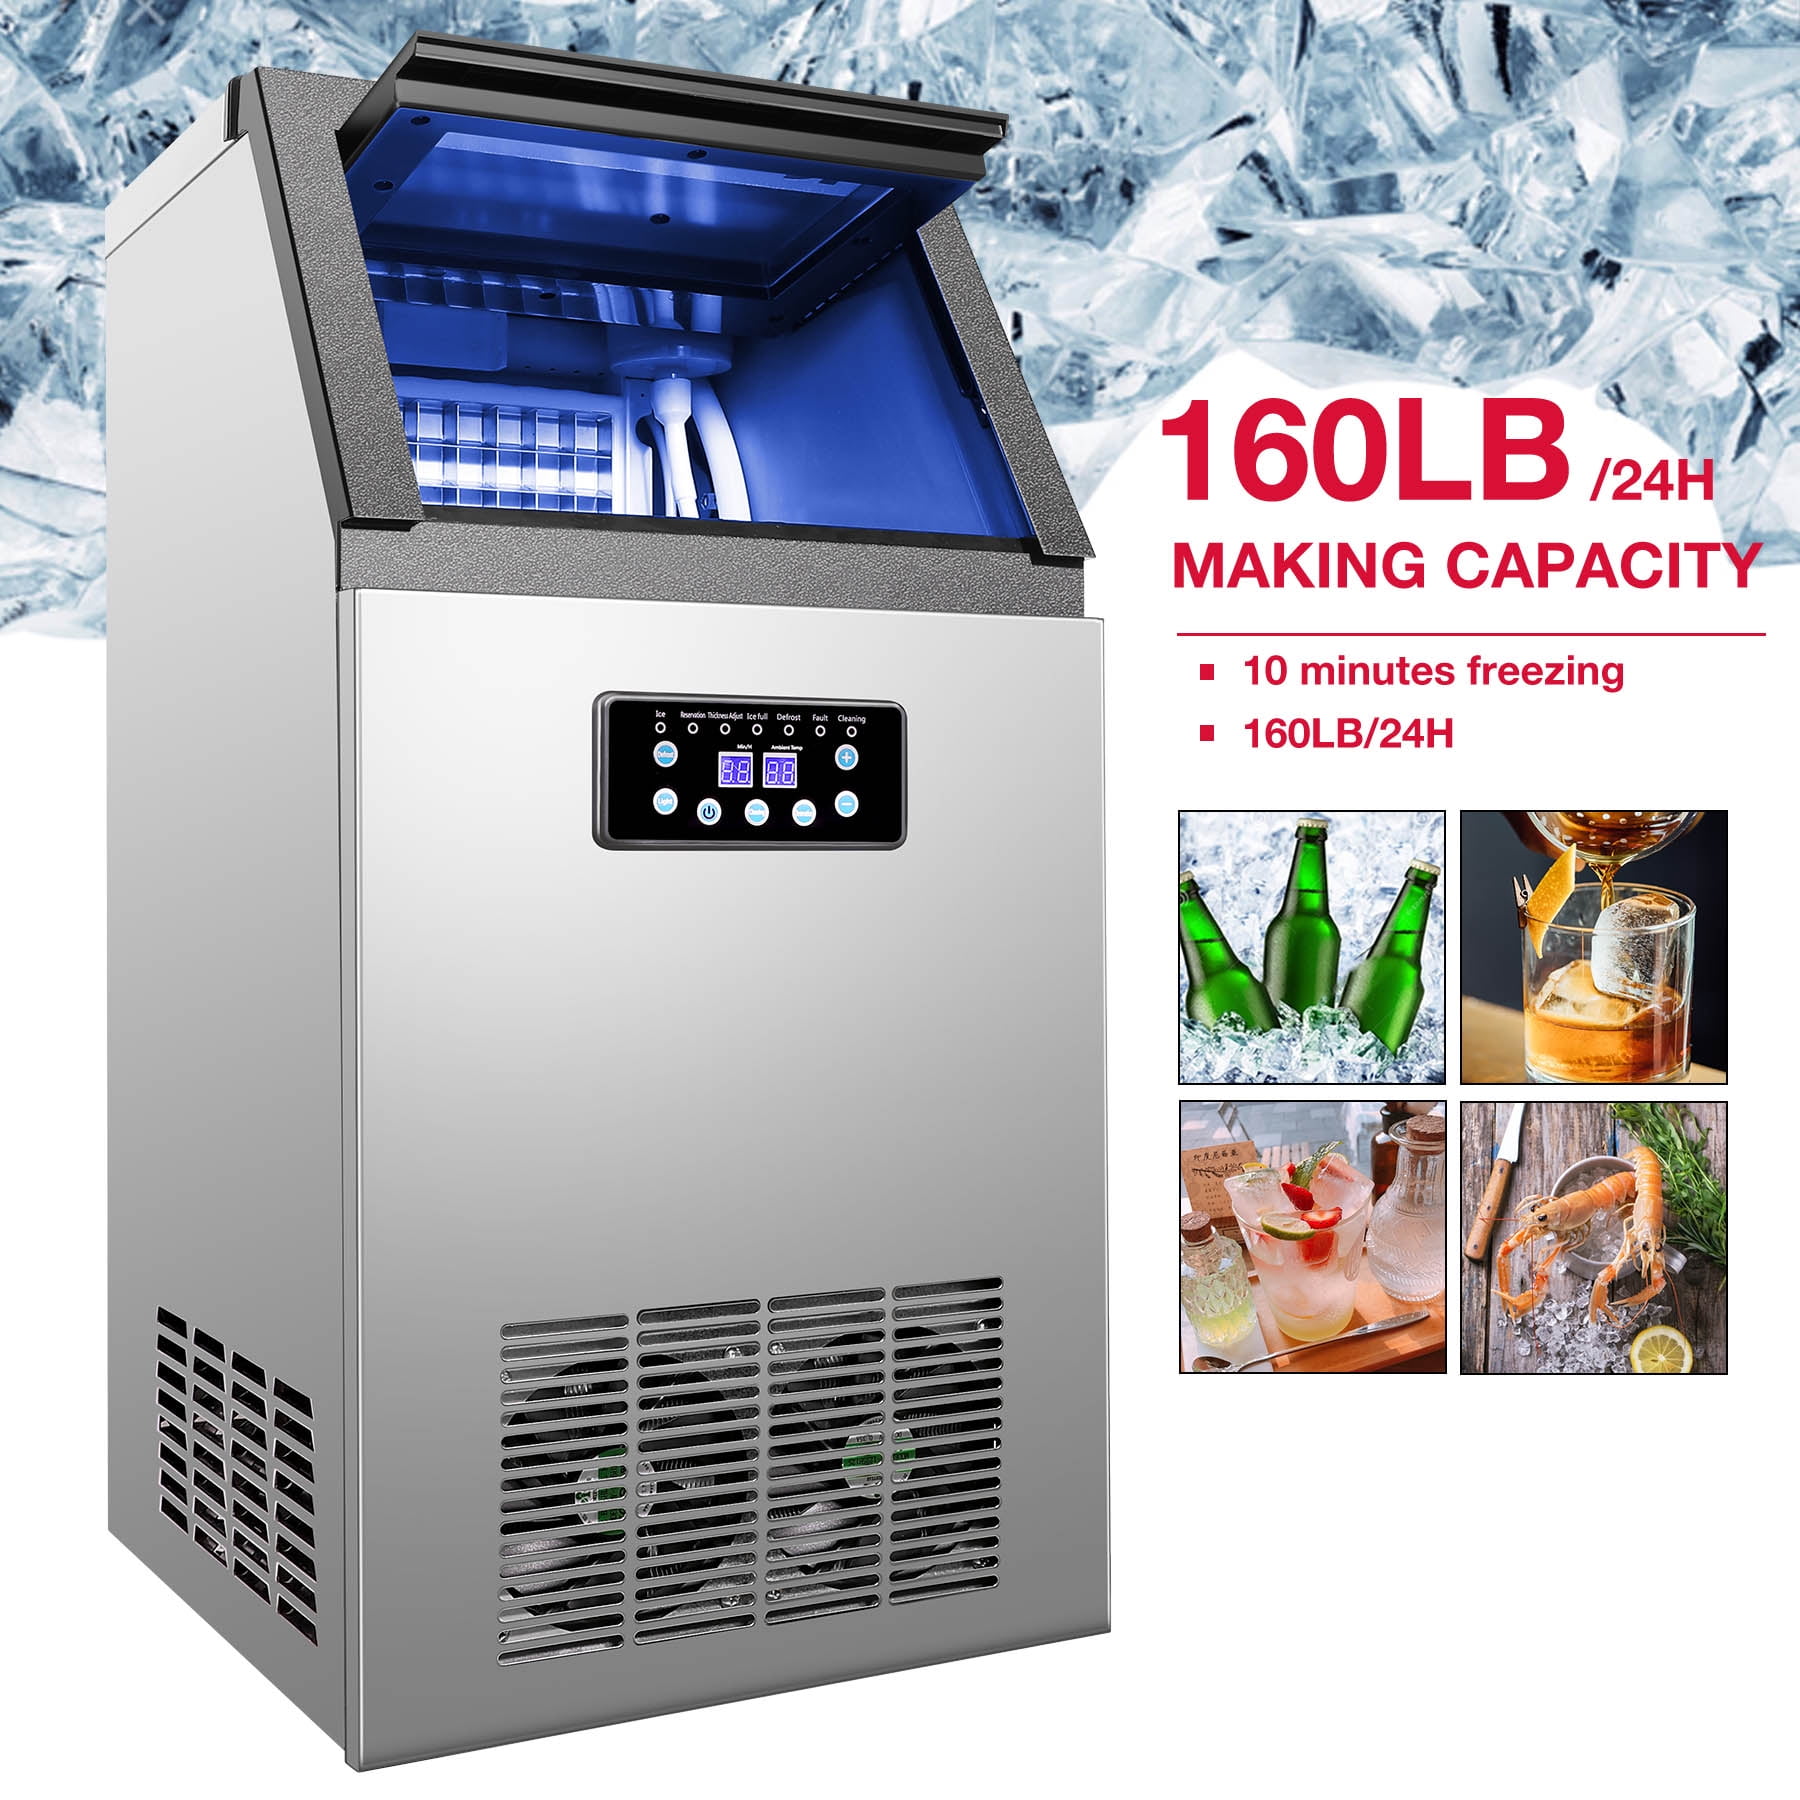 Produces Ice Cubes within approx 7-13 min Compact and Portable Ice Cube Maker Includes Scoop and Removable Basket Ice Maker Machine 2L Tank No Plumbing Required Silber